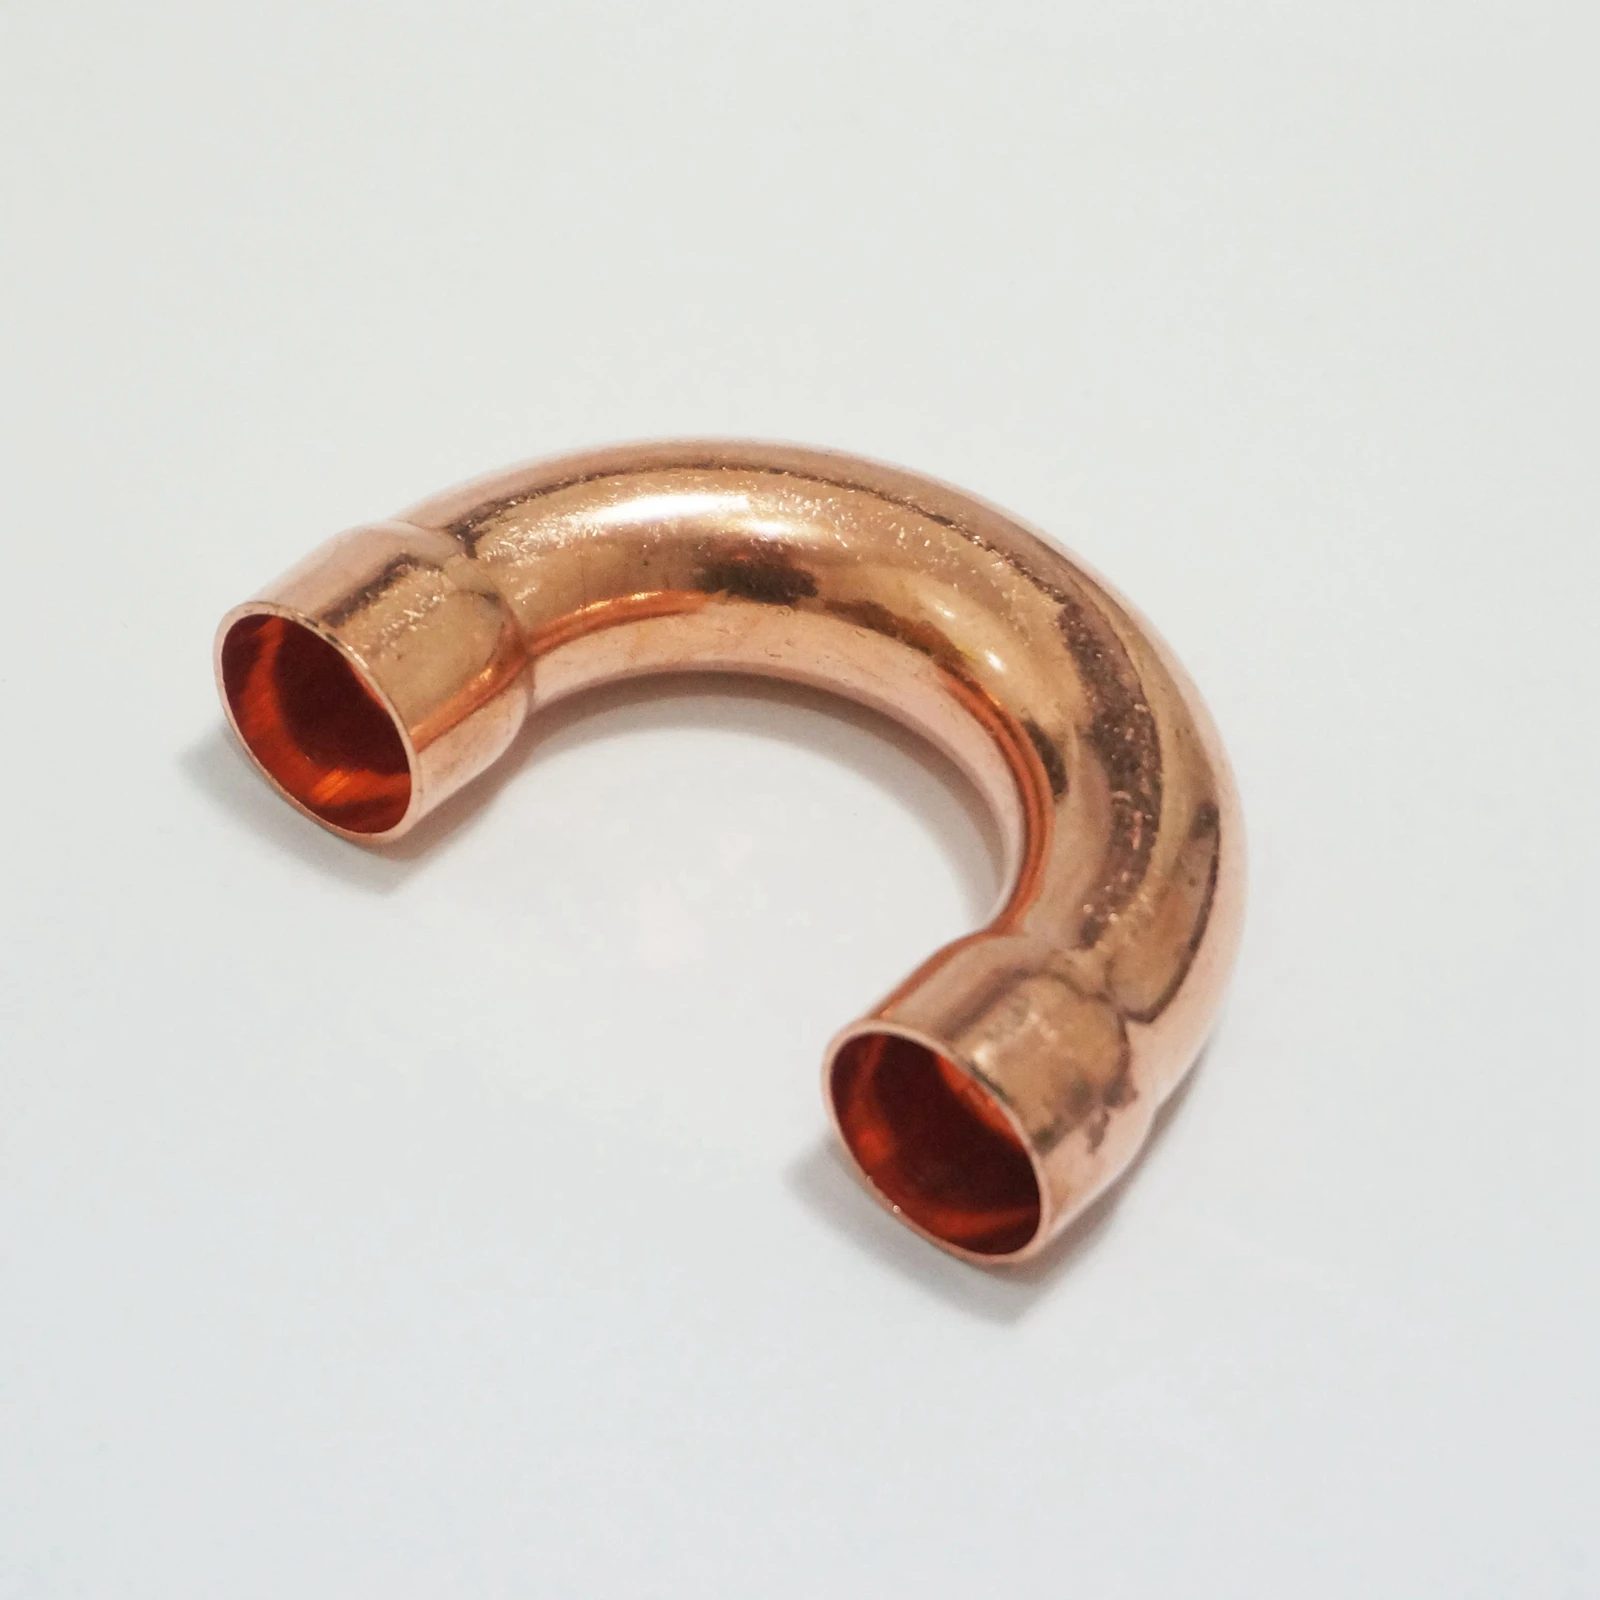 

19x1x60mm 180 Degree Return Bend Copper End Feed Plumbing Pipe Fitting for gas water oil